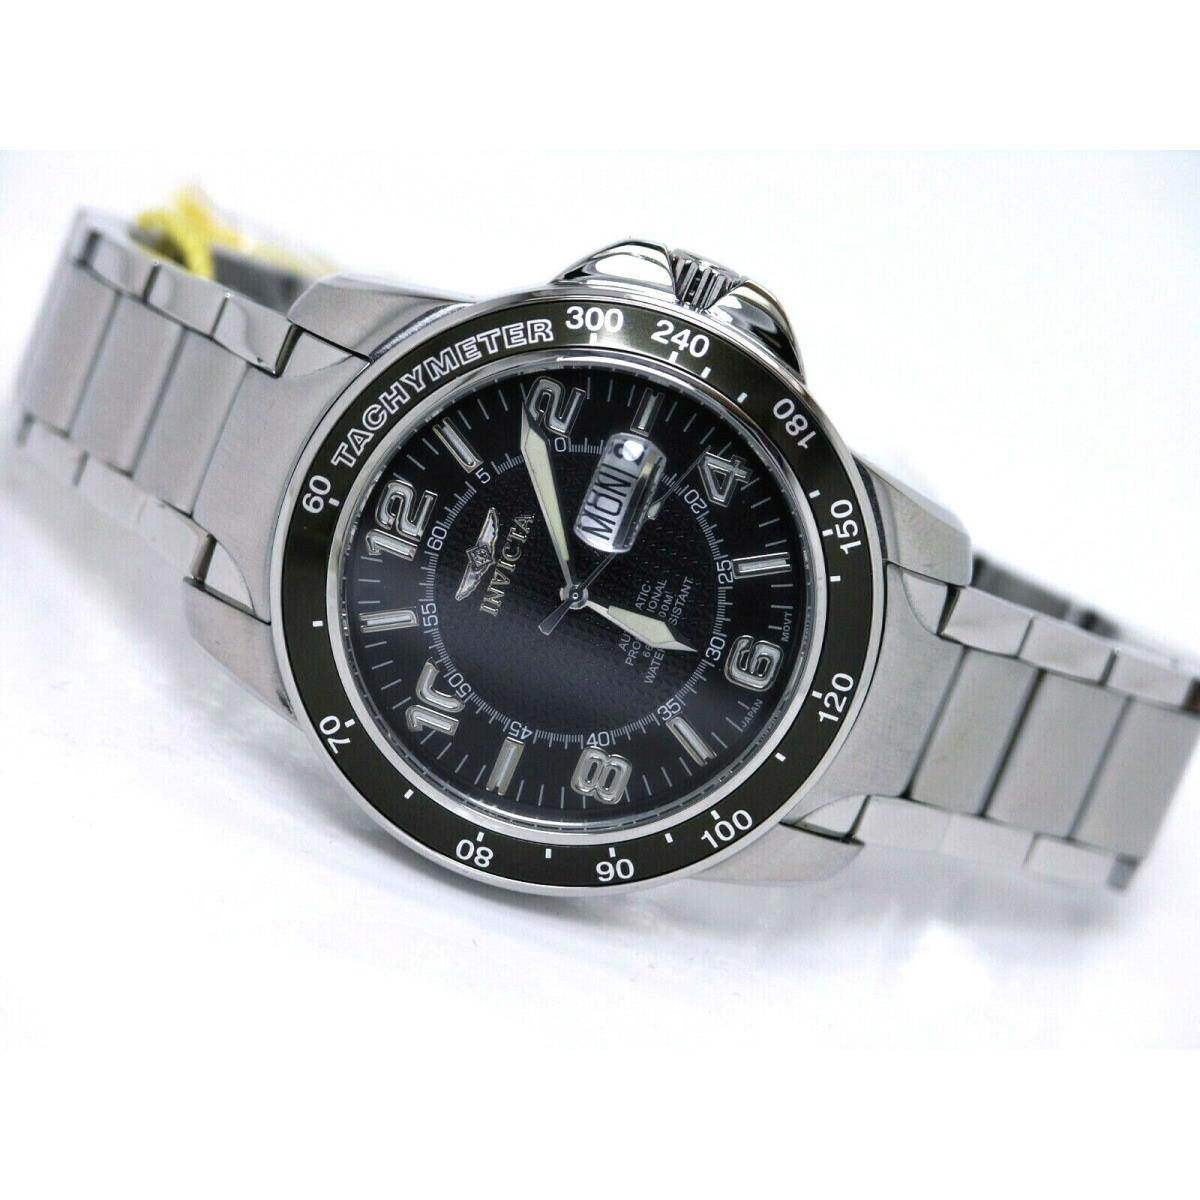 Invicta 3296 Automatic Professional Black Dial Steel Watch 200M